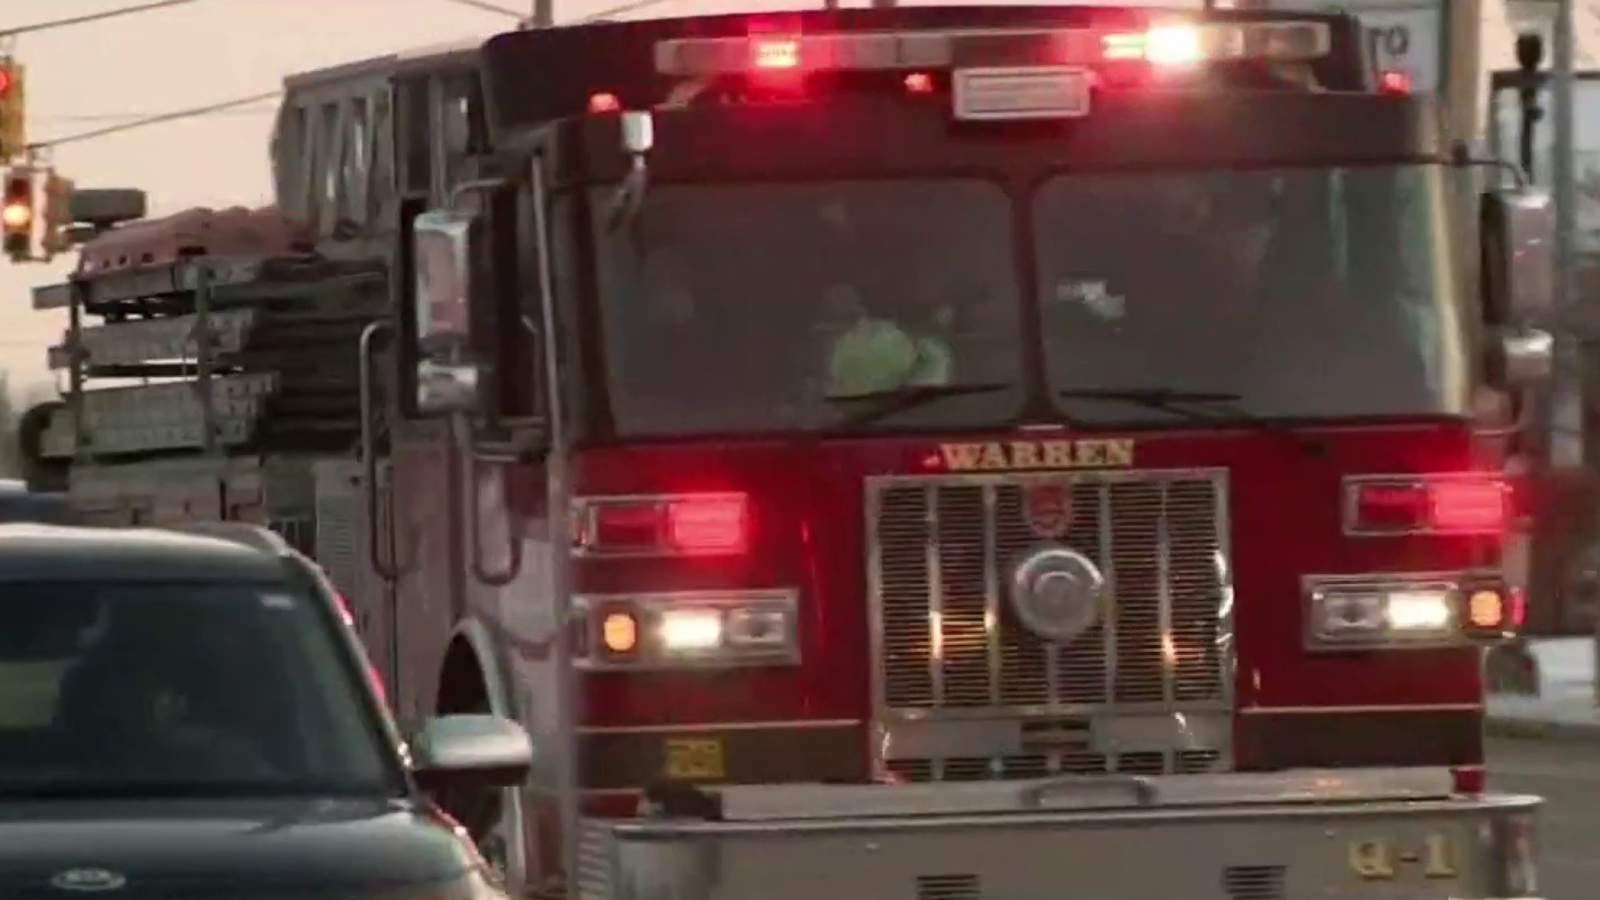 Staff shortage leads to overtime budget concerns for Warren Fire Department